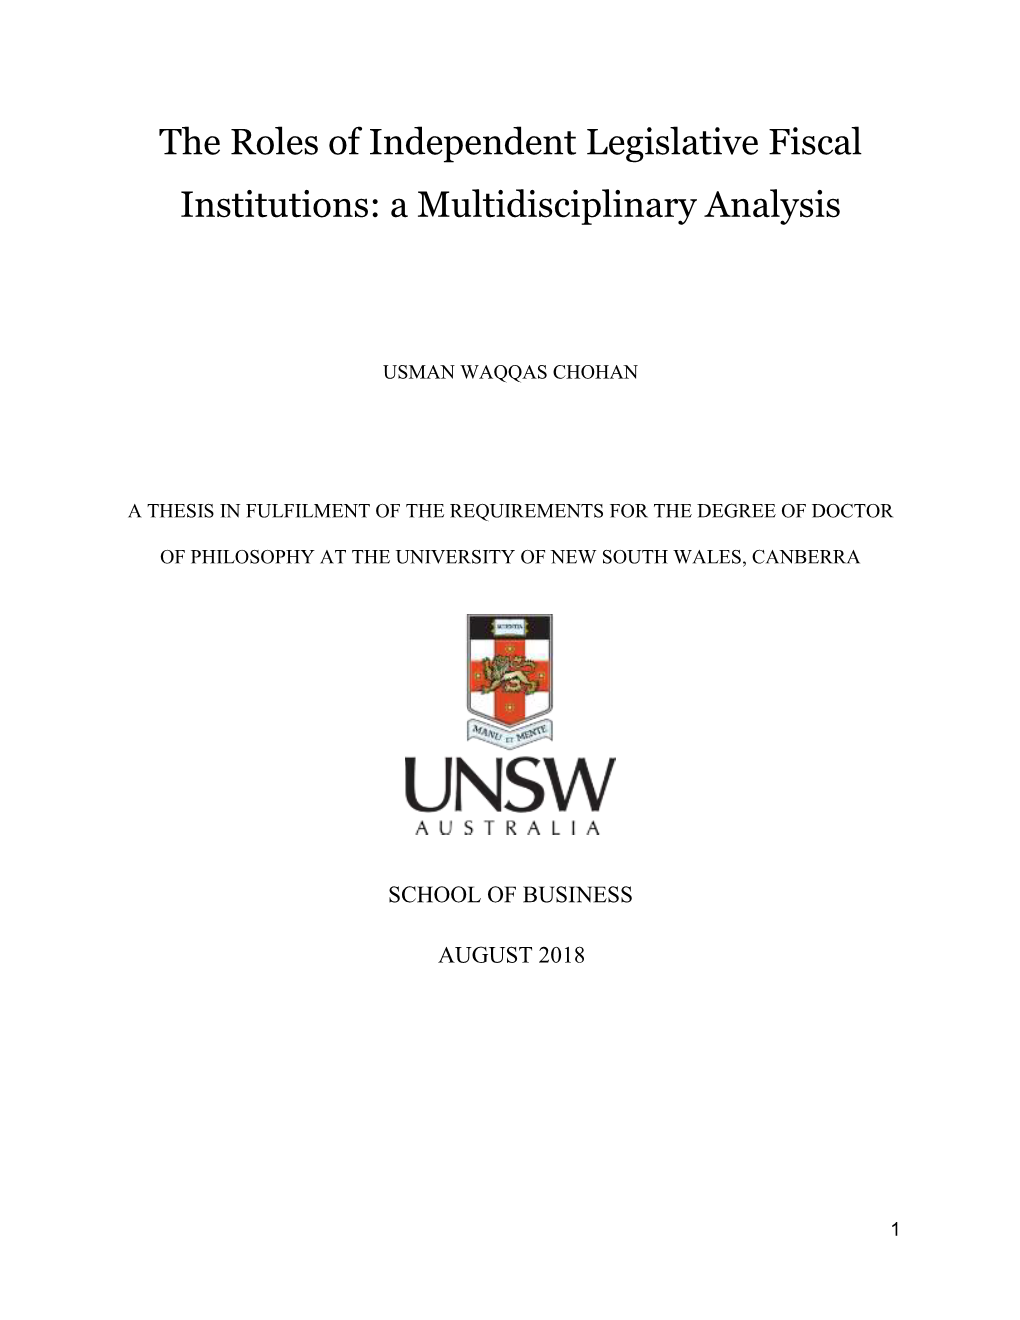 The Roles of Independent Legislative Fiscal Institutions: a Multidisciplinary Analysis